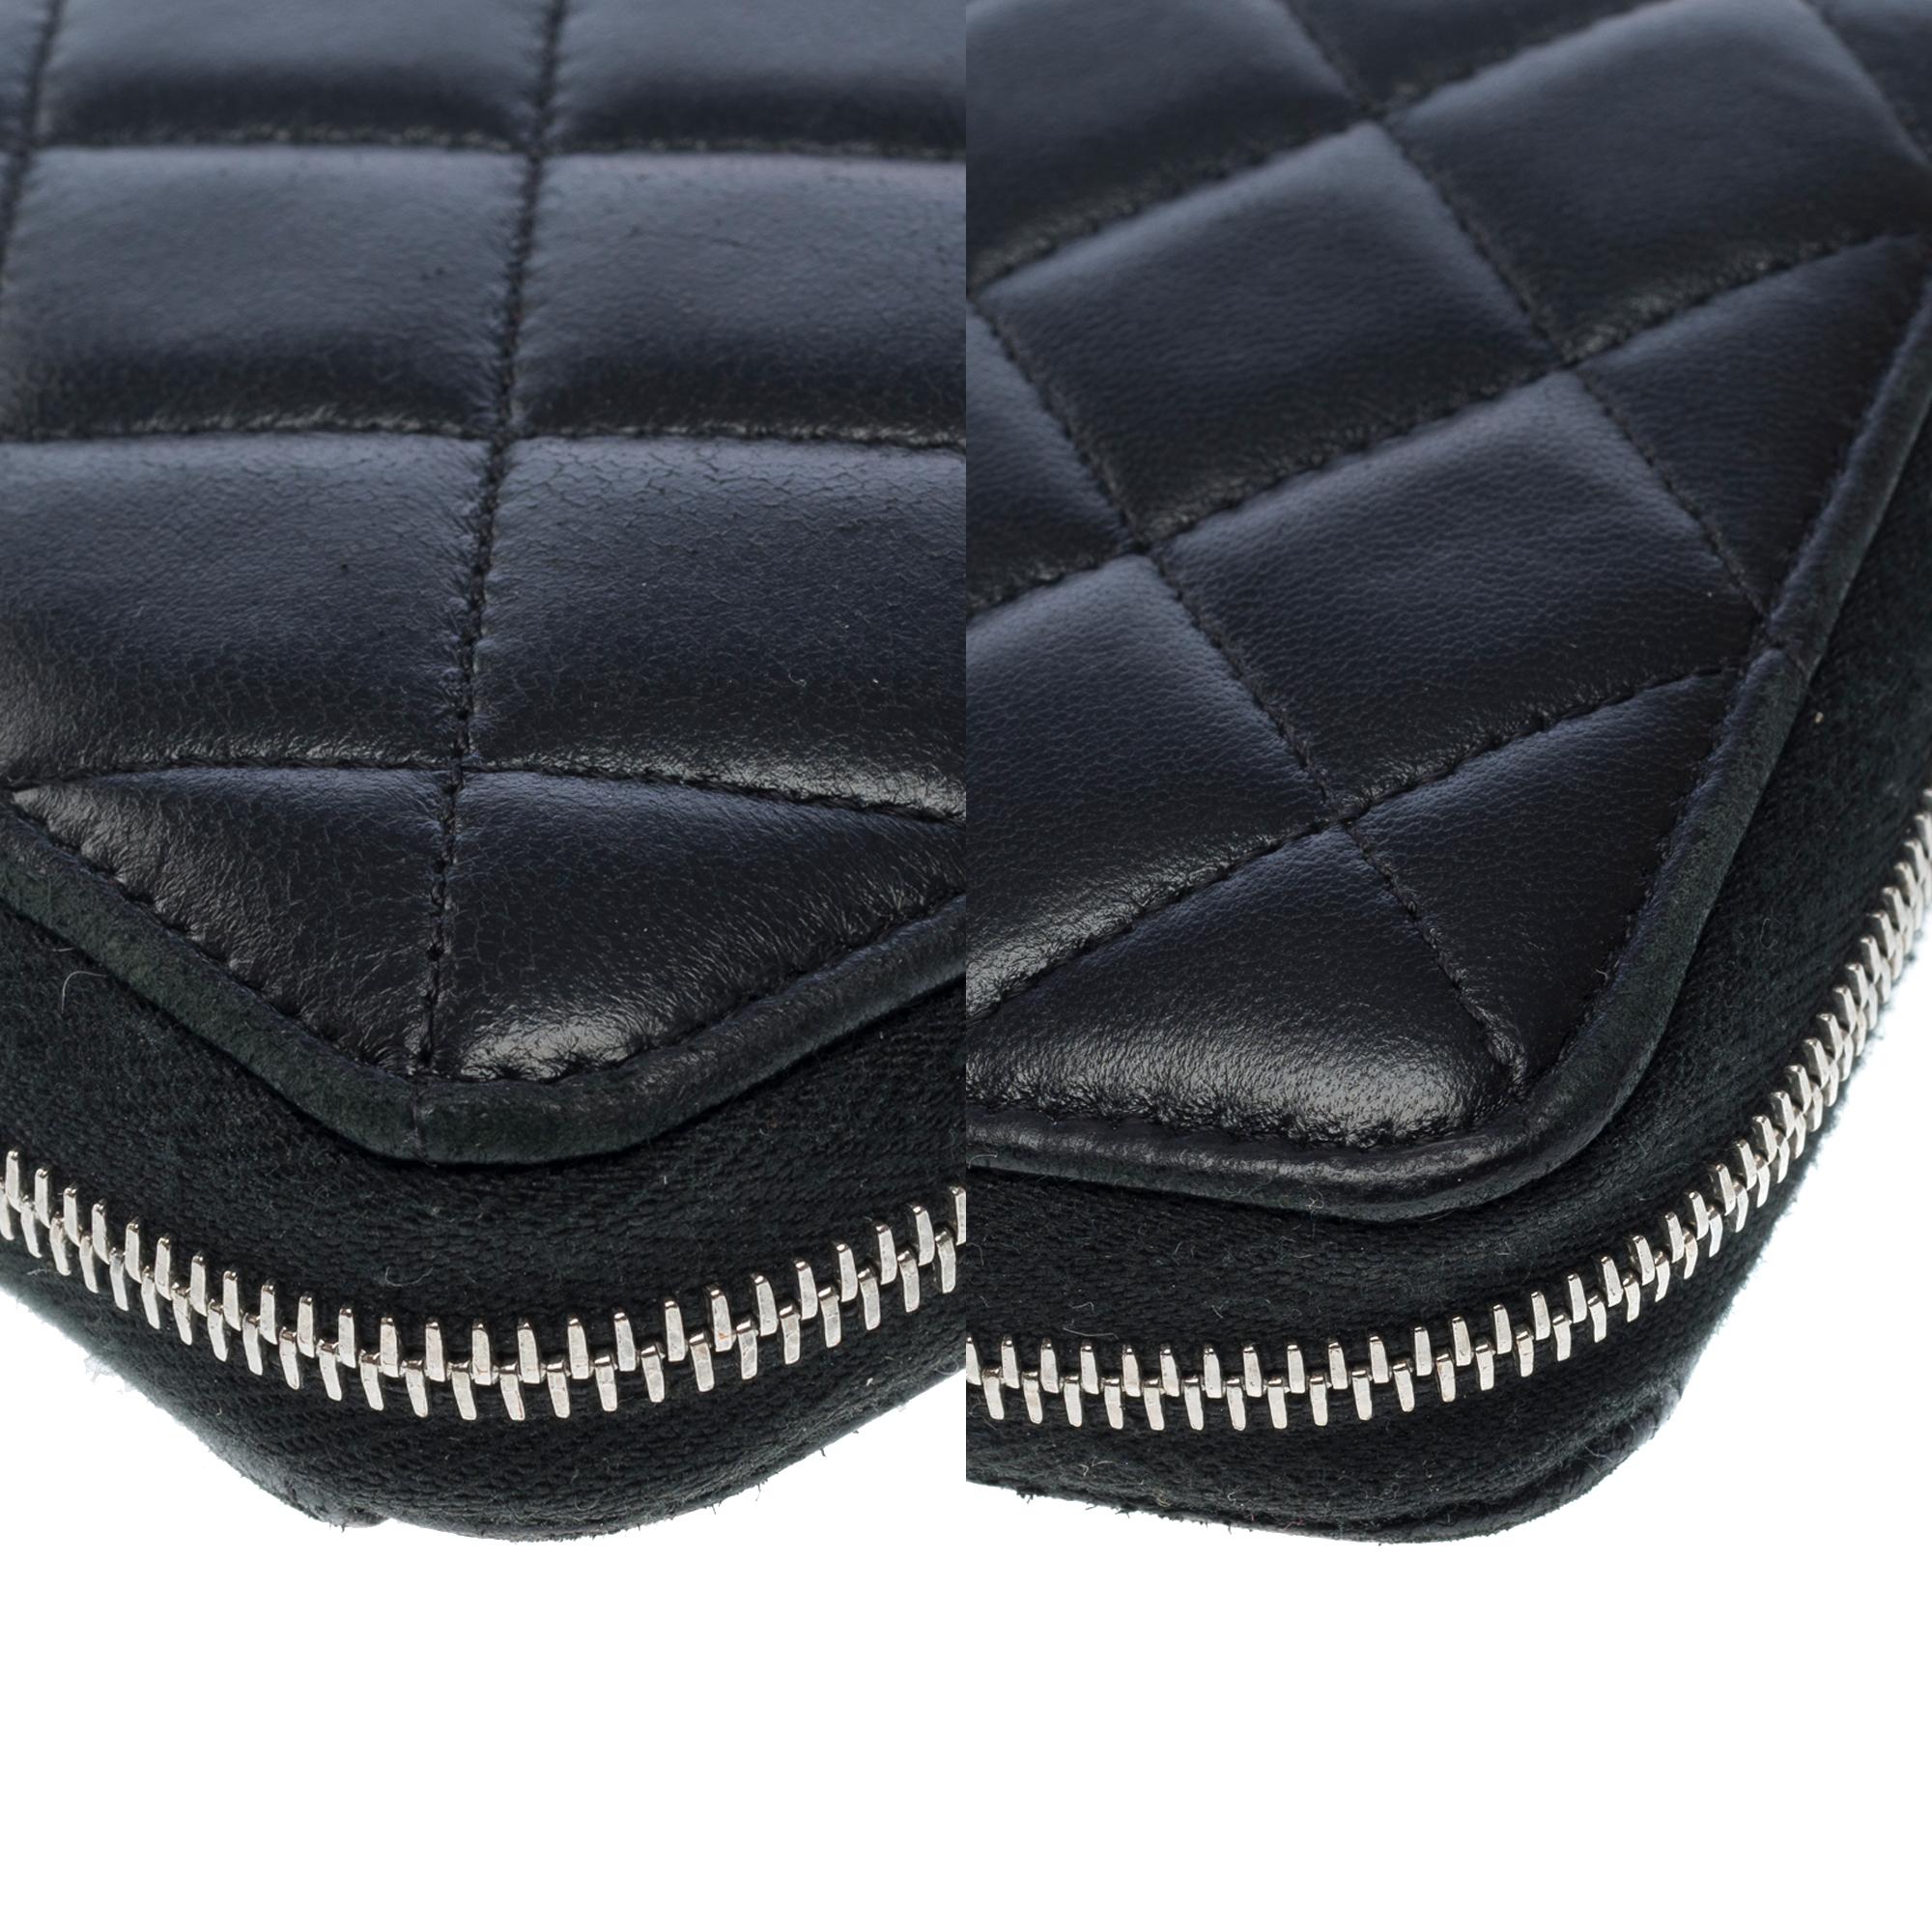 Lovely Chanel Compagnon Wallet in black quilted lambskin leather, SHW For Sale 6